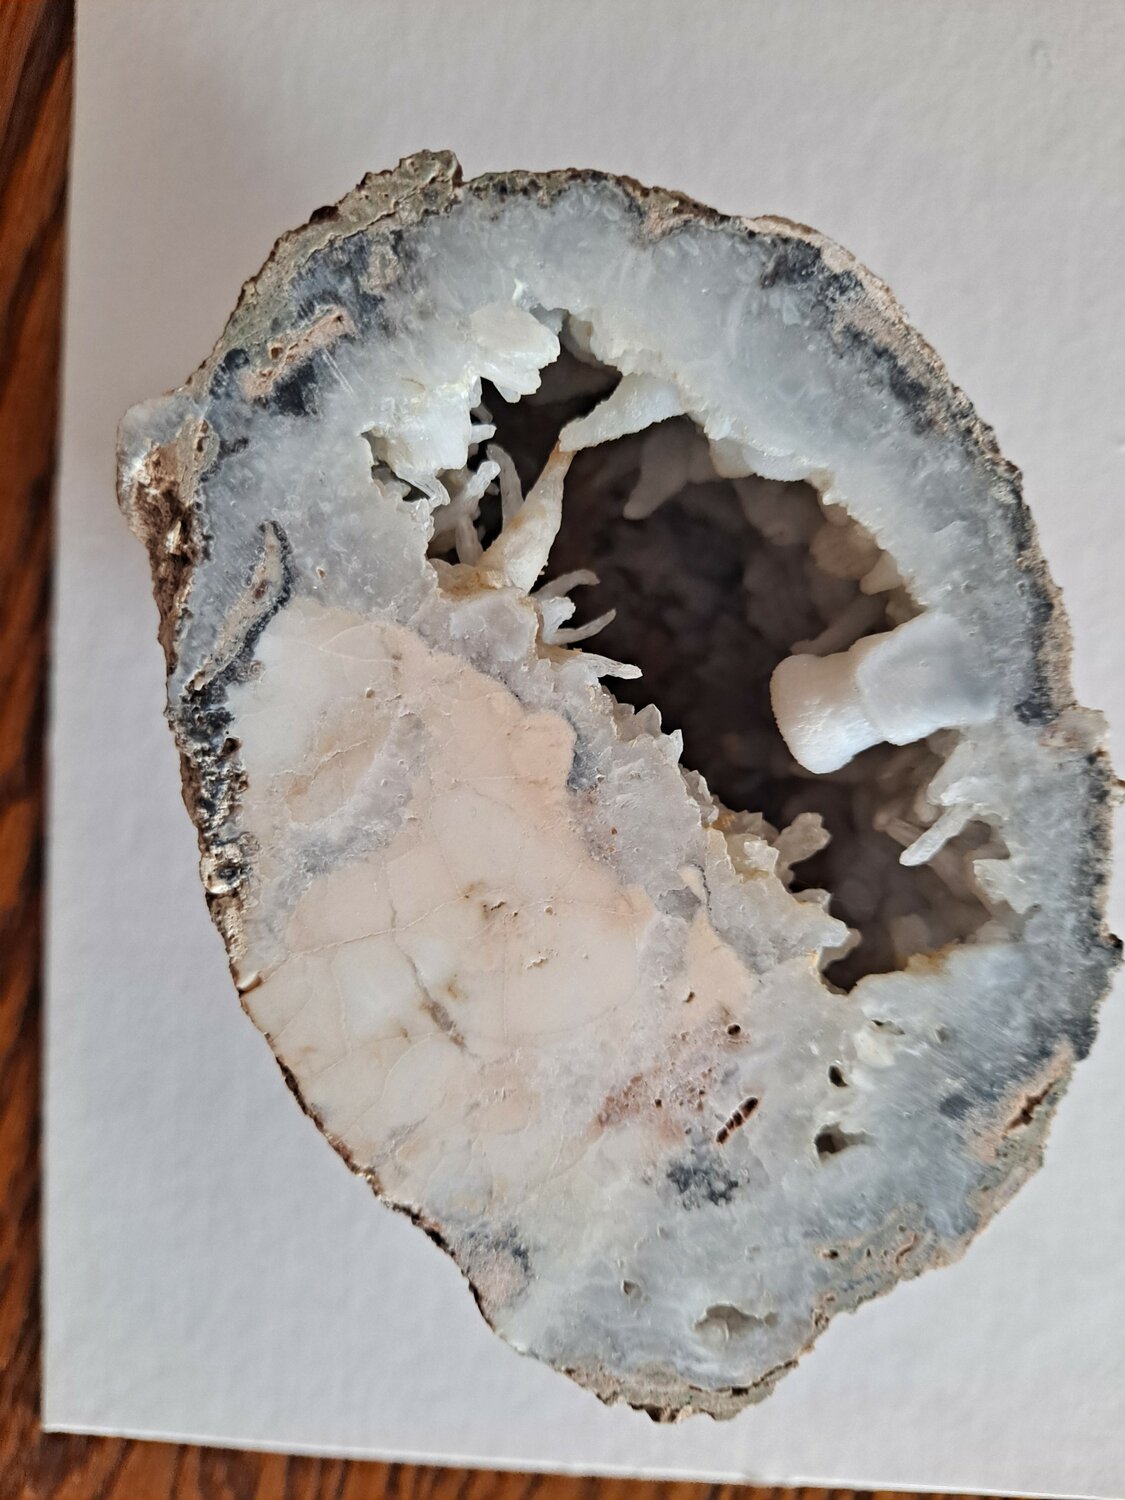 A geode from Colorado.